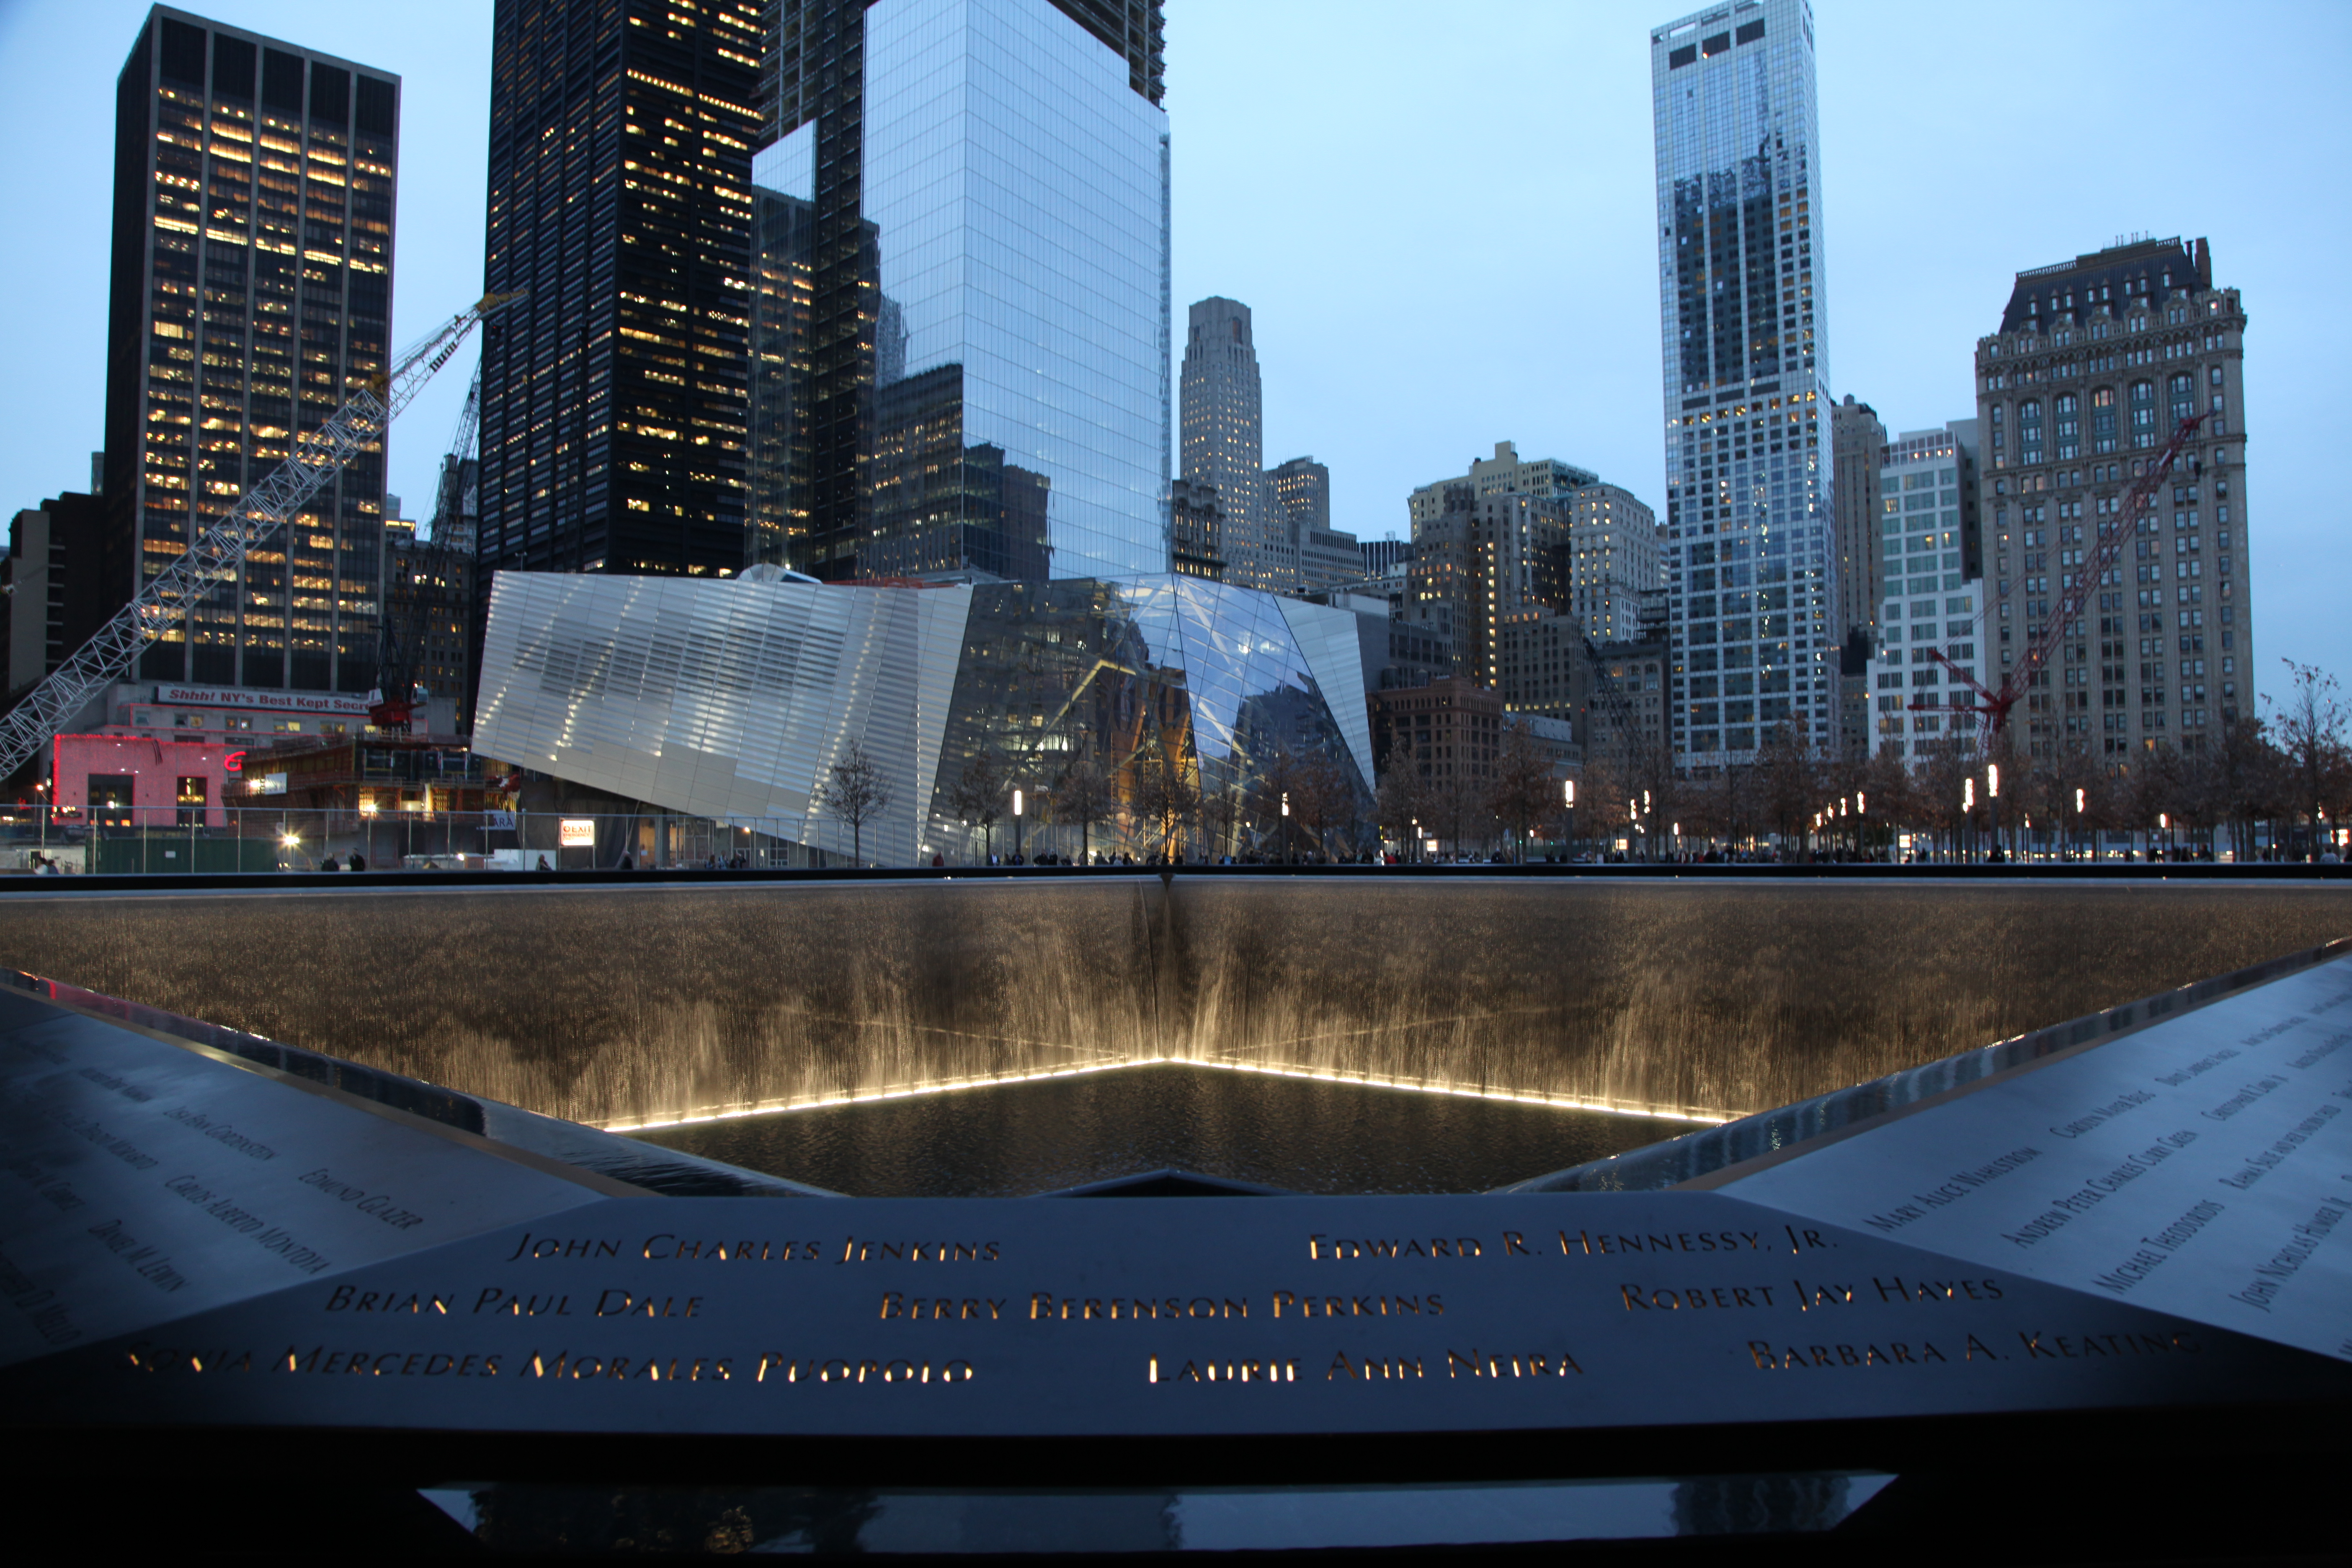 5 Tips to Save While Touring the World Trade Center Site